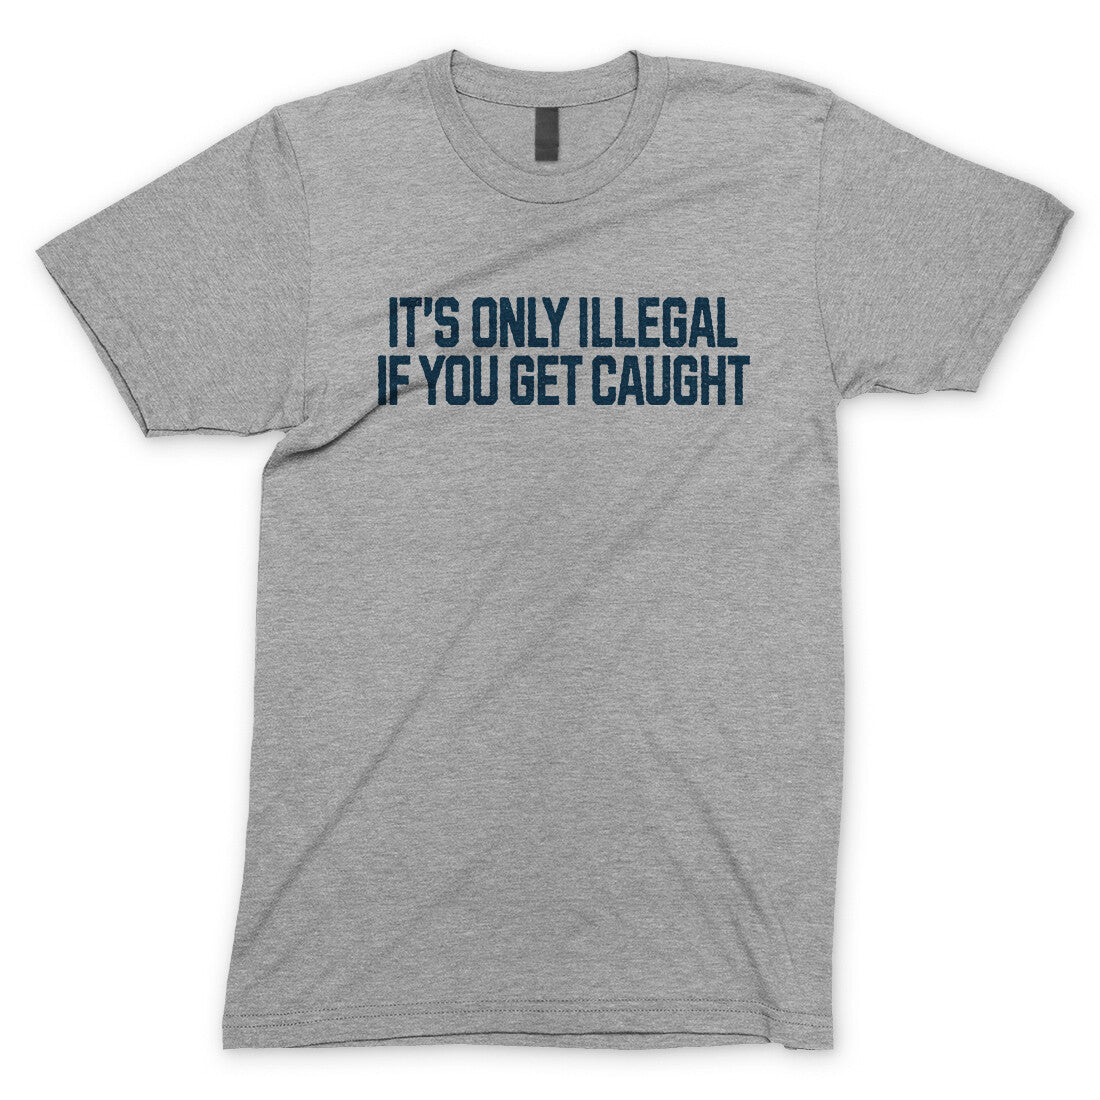 It’s Only Illegal If You Get Caught in Sport Grey Color